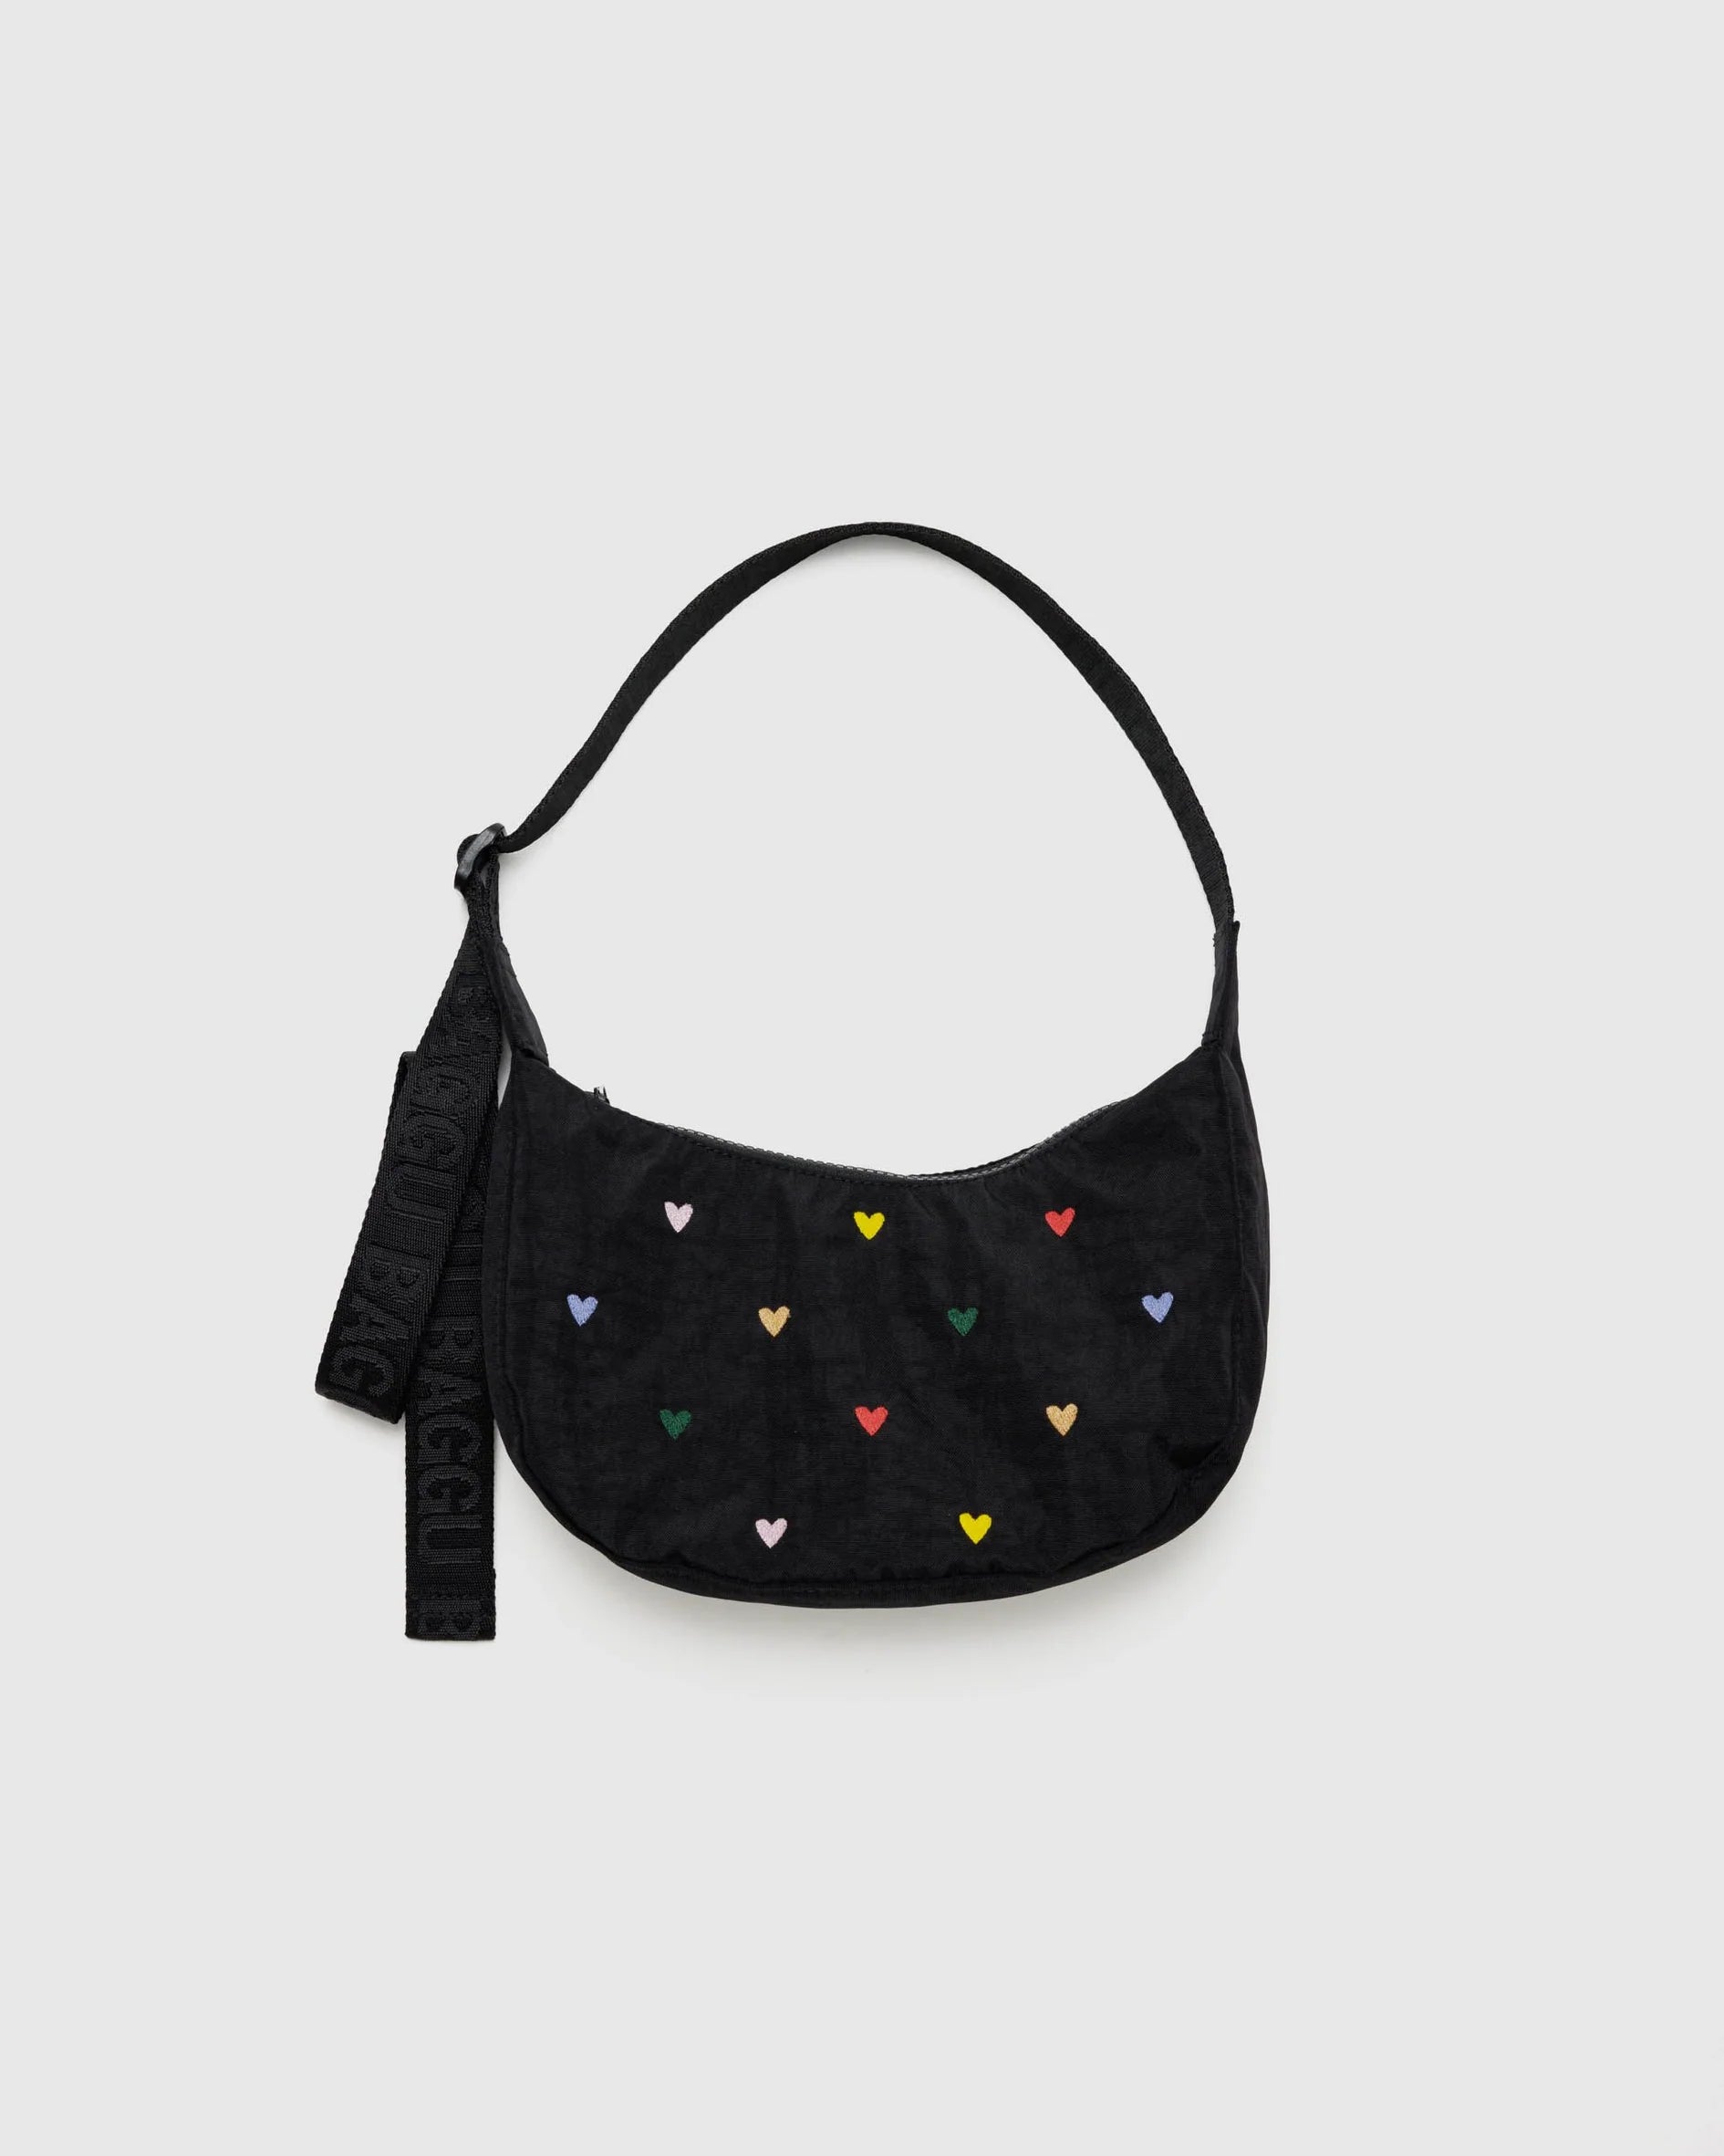 BAGGU small nylon crescent bag in embroidered hearts pattern